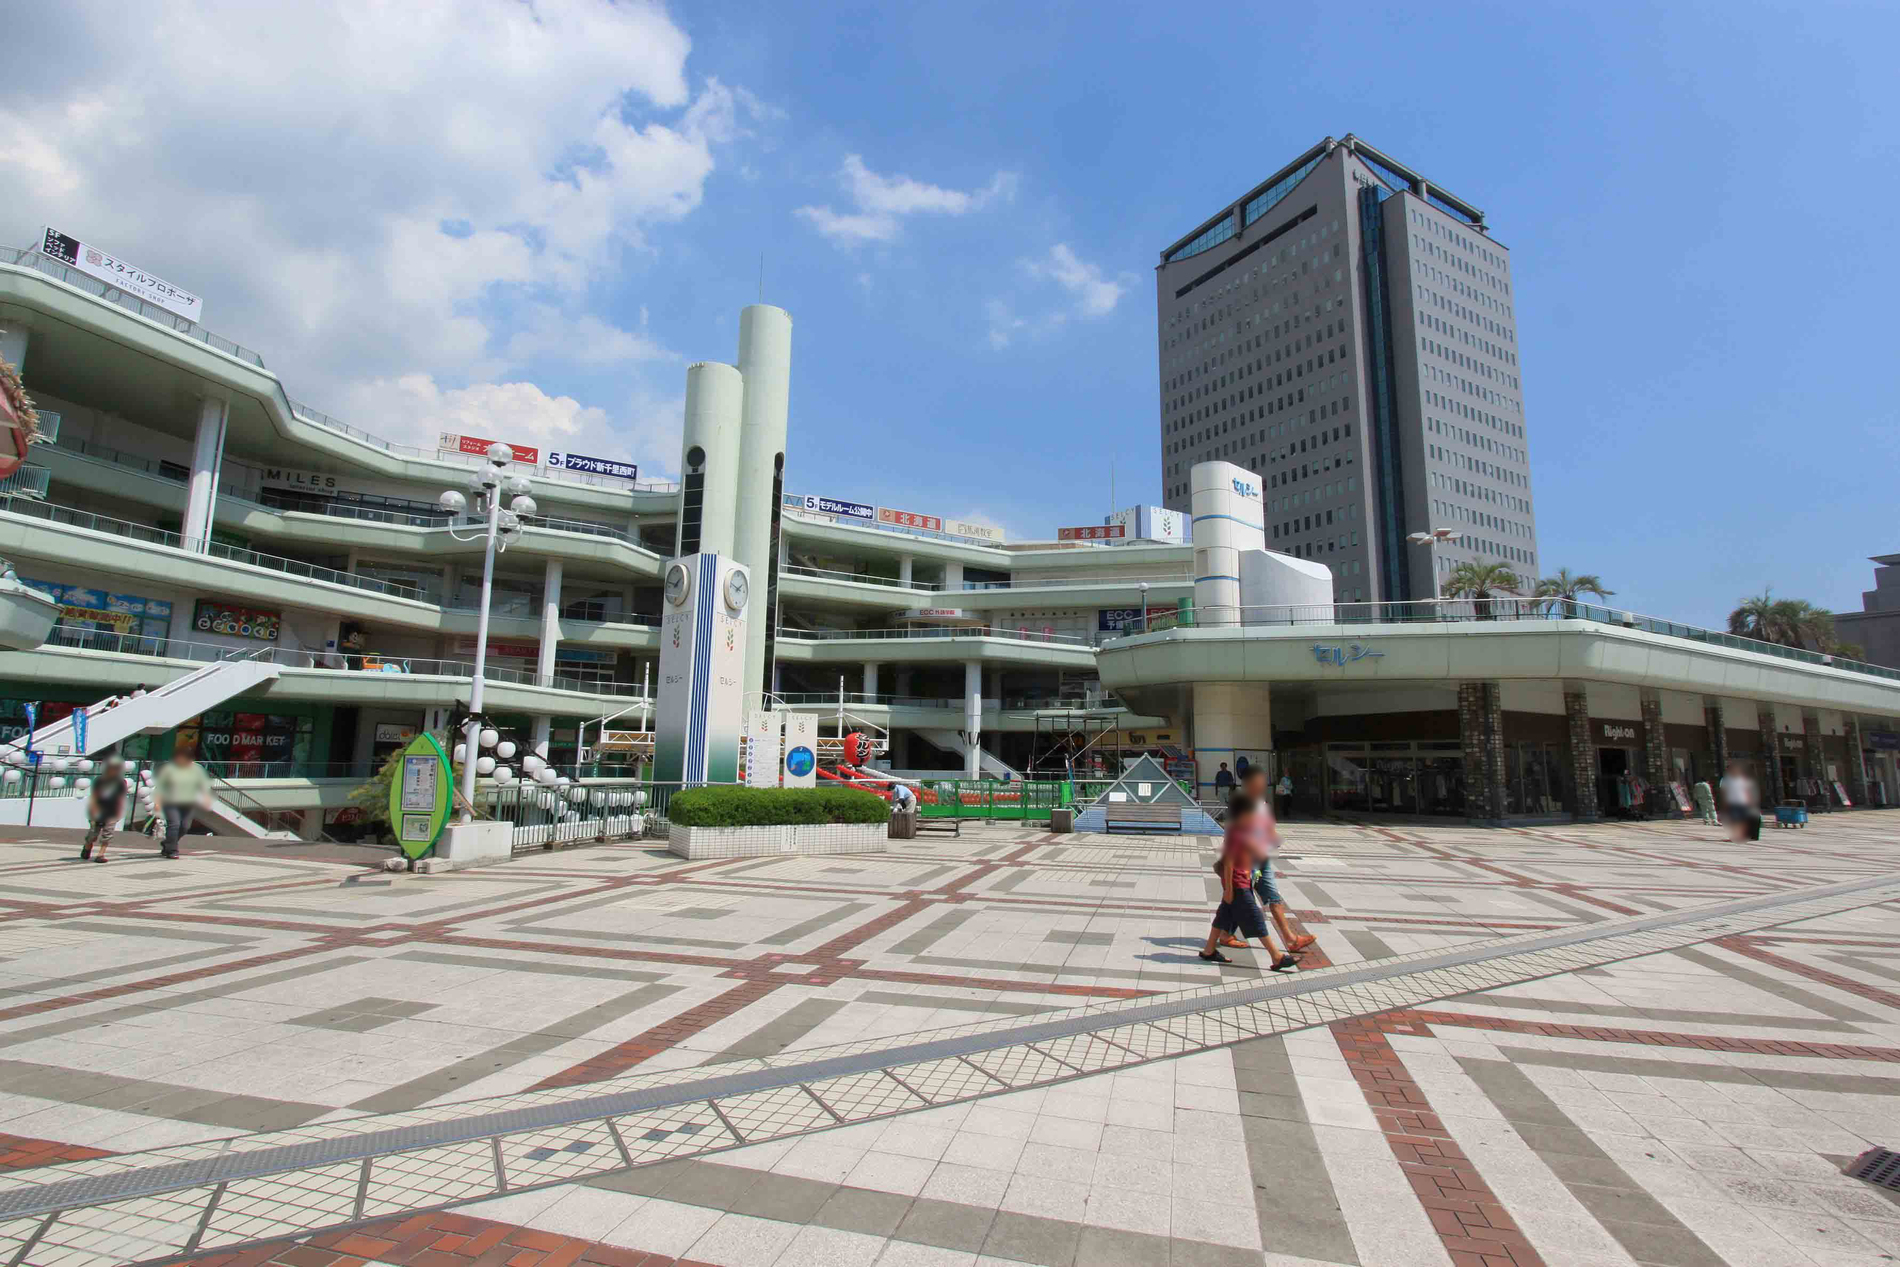 Shopping centre. Until Serushi 2000m  [Walk 25 minutes] In Serushi of direct connection to the subway Midosuji Line "Senri" station, It has also been made, such as events in the middle of the square, Enjoy the day. Besides enhancement facilities such as Hankyu and Daimaru Chisato